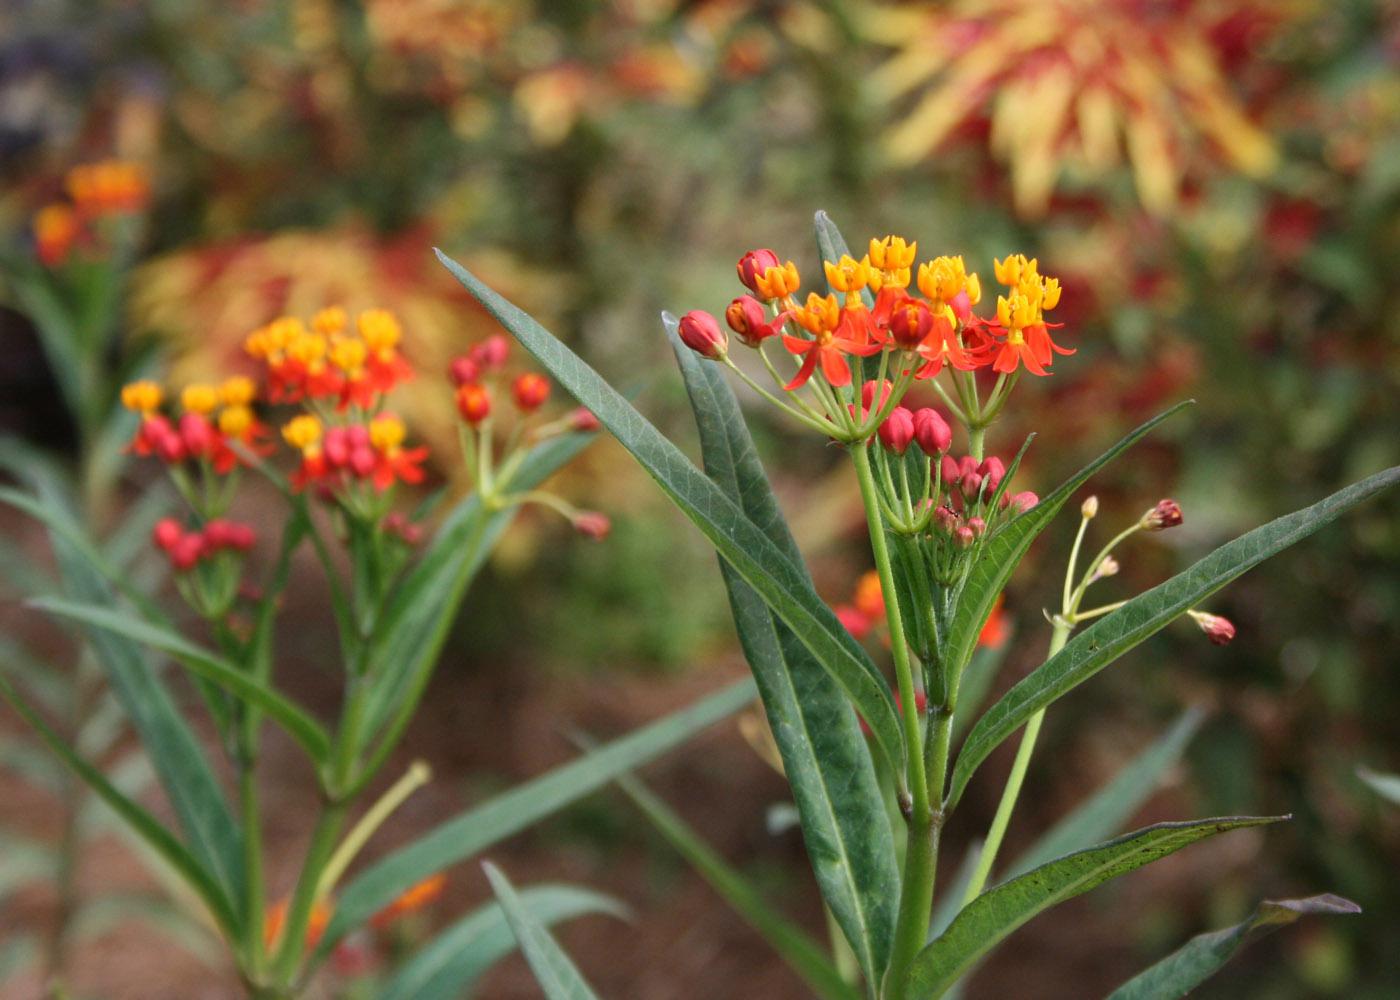 The orange and red flowers of 2012 Mississippi Medallion-winner butterfly weed make it a colorful addition to the landscape.